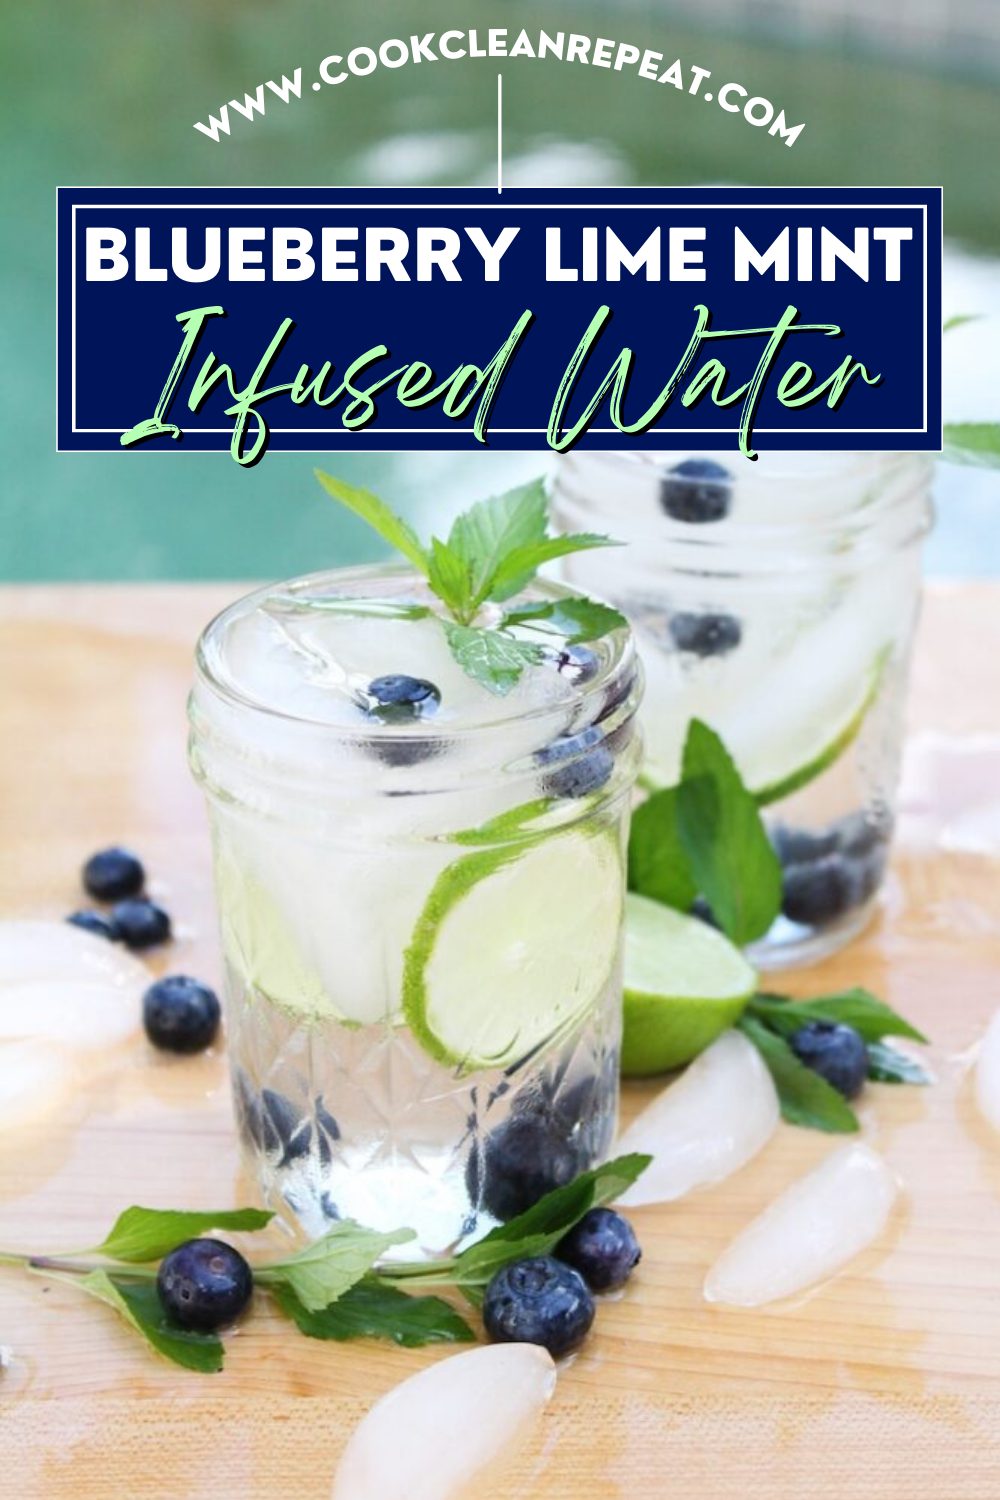 Pin showing the title Blueberry Lime Mint Infused Water